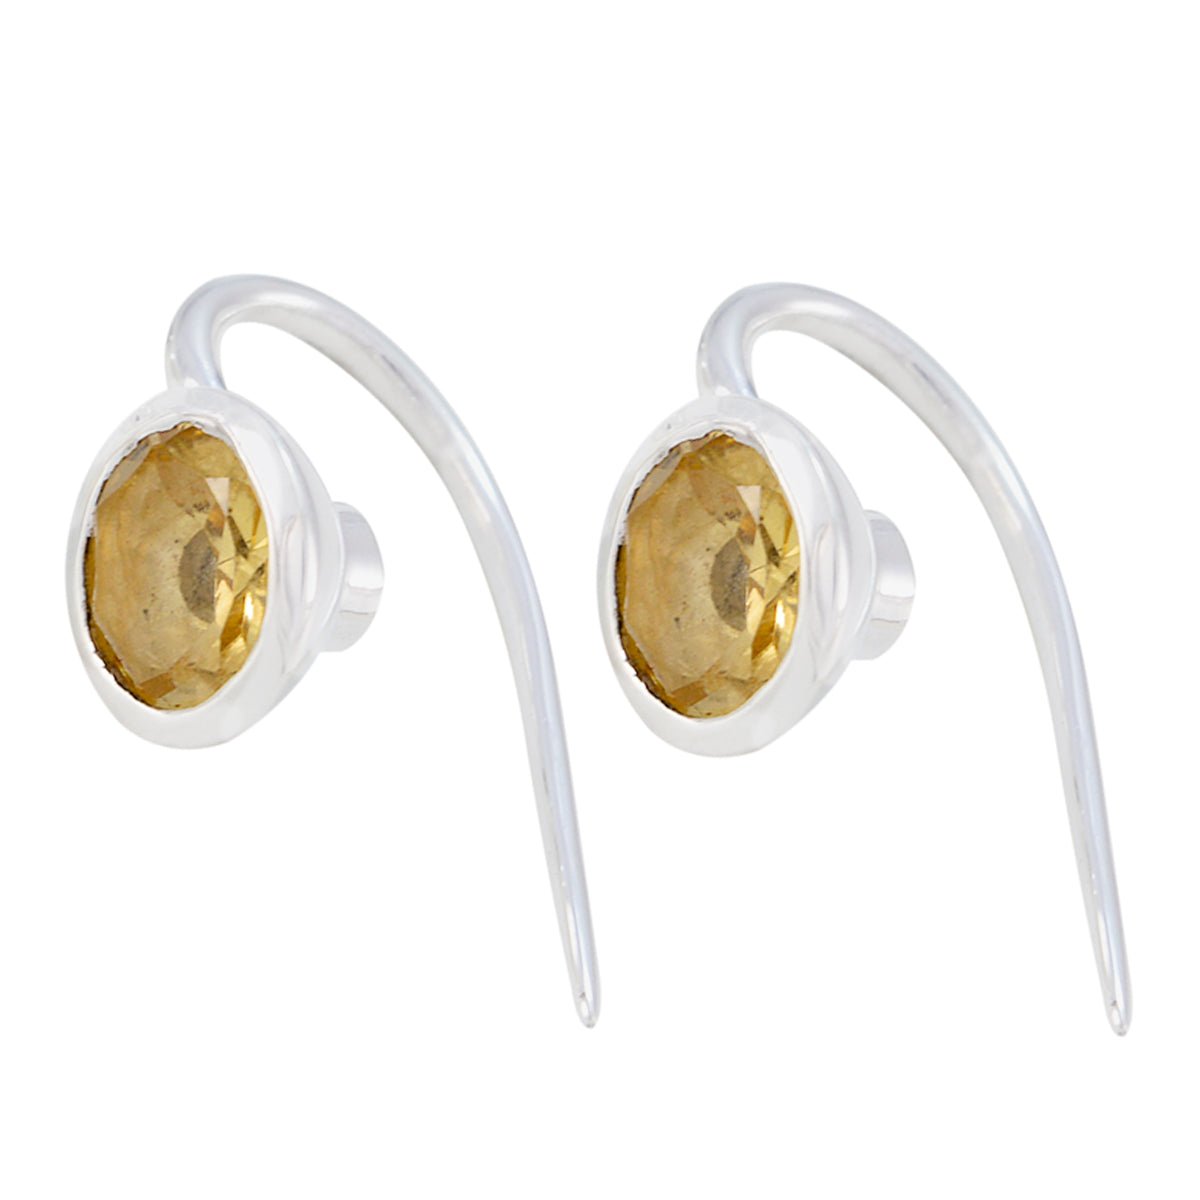 Riyo Good Gemstones round Faceted Yellow Citrine Silver Earrings gift for college